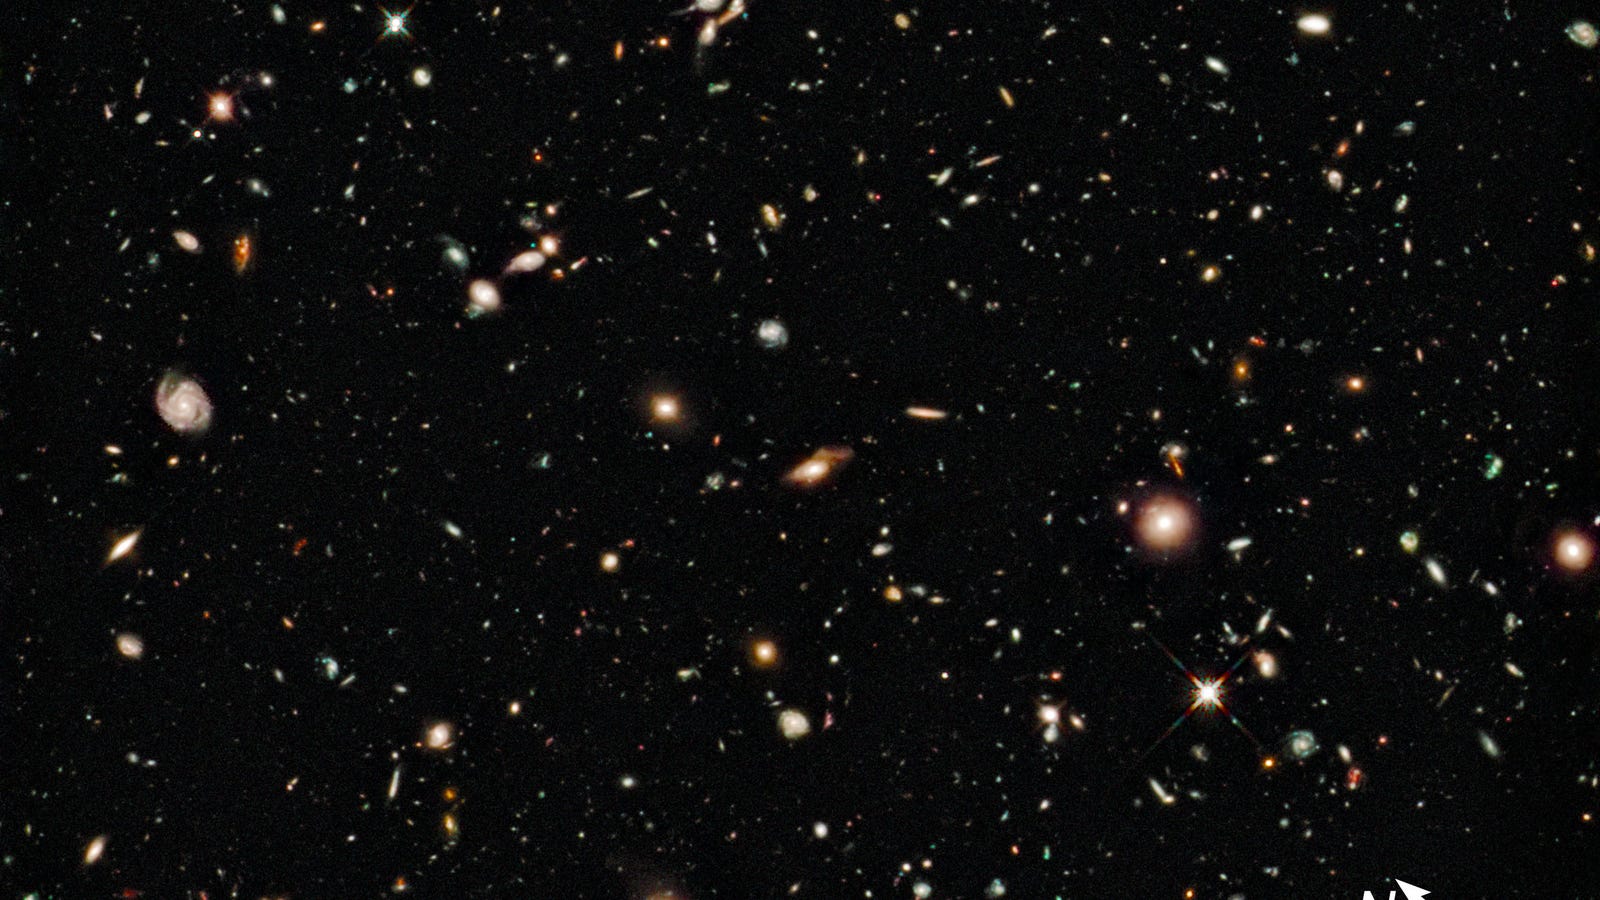 New Hubble Ultra Deep Field Image Will Inspire You Today